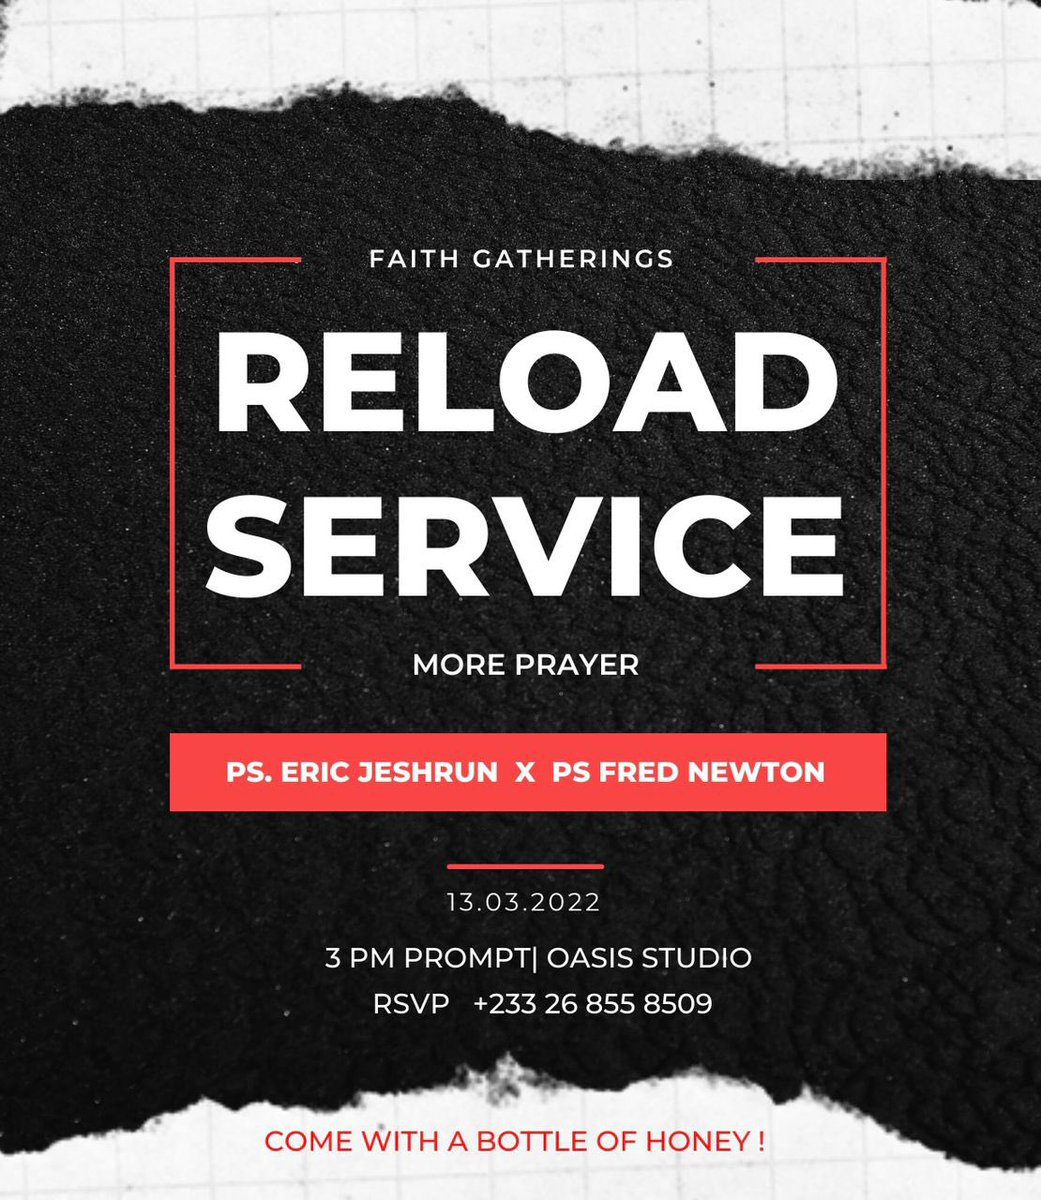 You are specially invited to our Sunday evening Faith Gathering Reload Service tomorrow 🔥🔥🔥 Theme: Turning Bitter Waters Sweet Time: 3pm Venue: Oasis Studio, Adabraka Come with a bottle of honey. #FaithGathering #ReloadService #ByTheSpirit @JeshrunEric @PrinceAAppiah